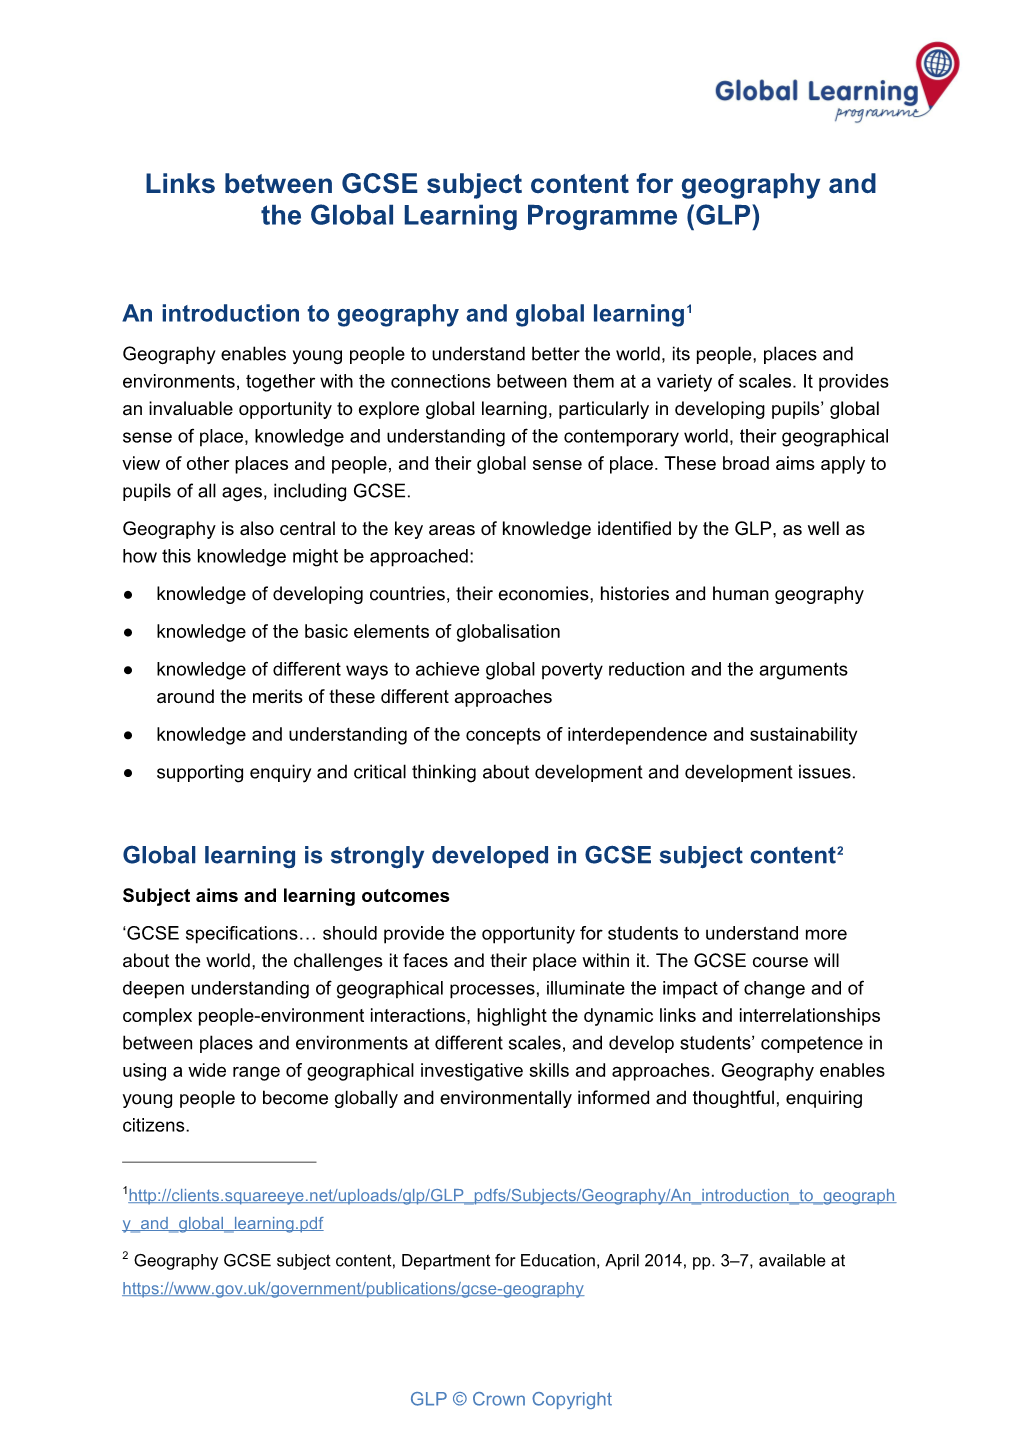 Links Between GCSE Subject Content for Geography and the Global Learning Programme (GLP)